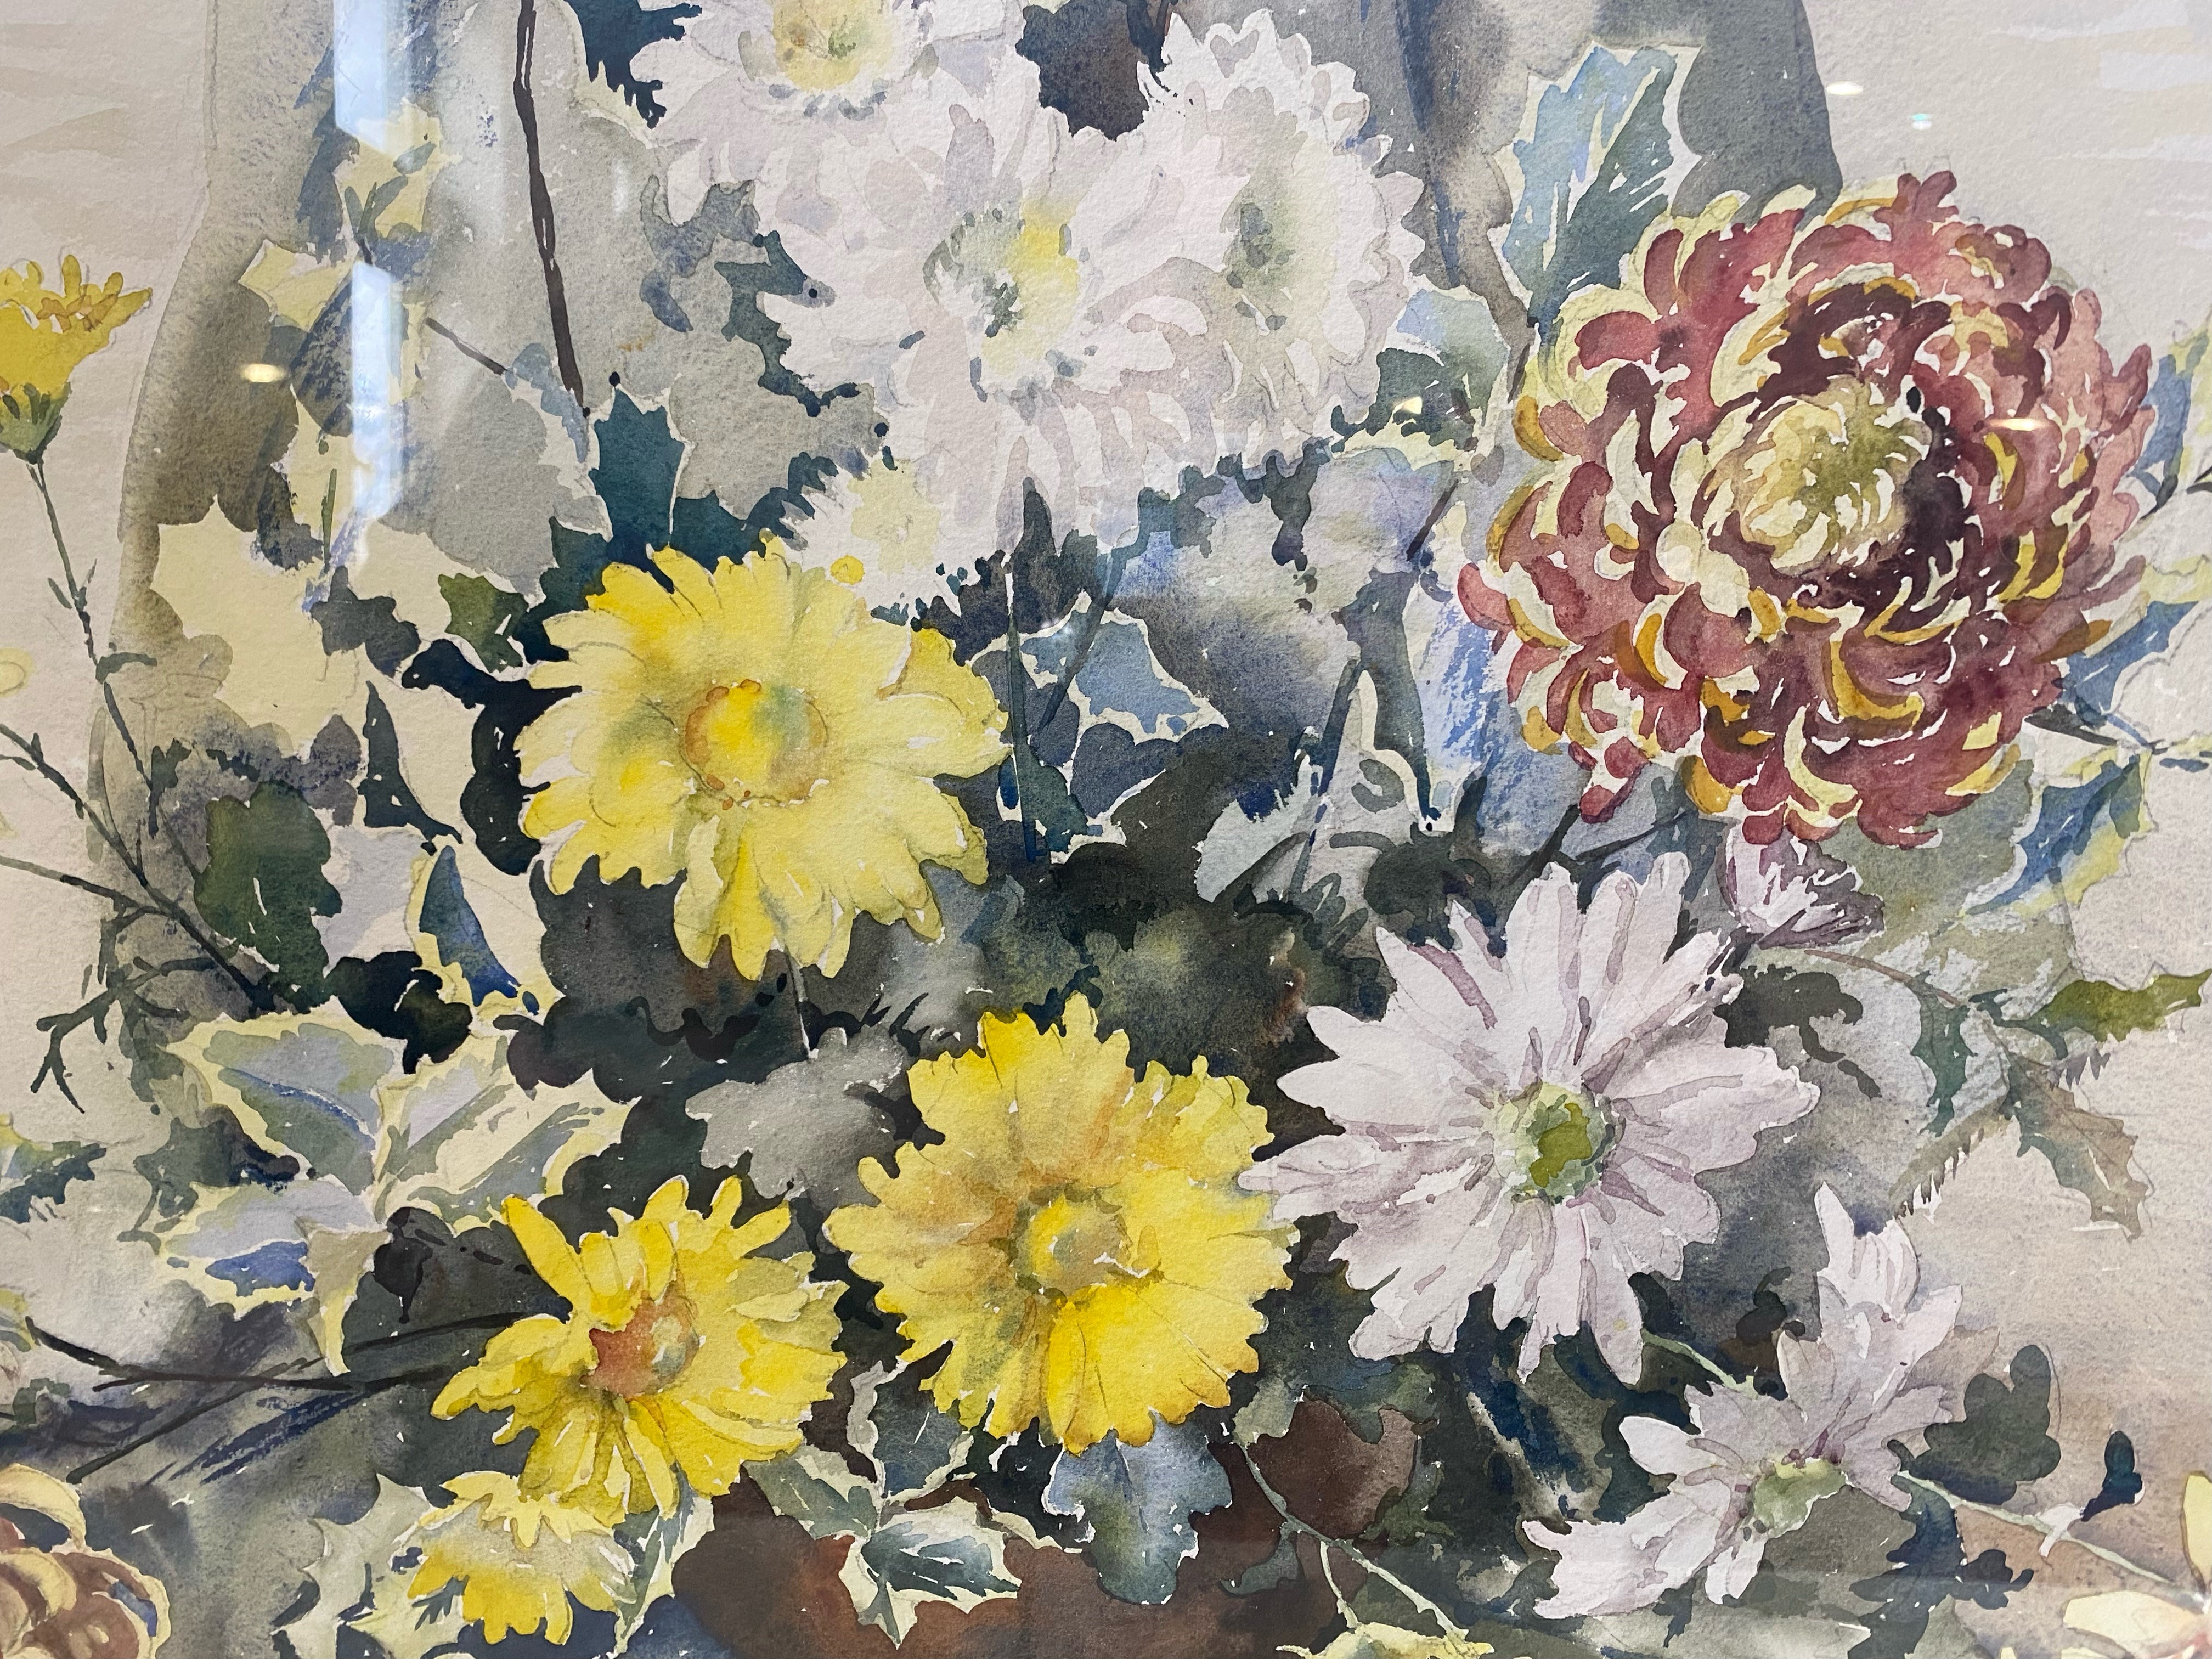 Watercolour Signed Phyllis I. Hibbert, Glass Framed. Subject - ' Chrysanthemums ' Signed to Front. - Image 3 of 3